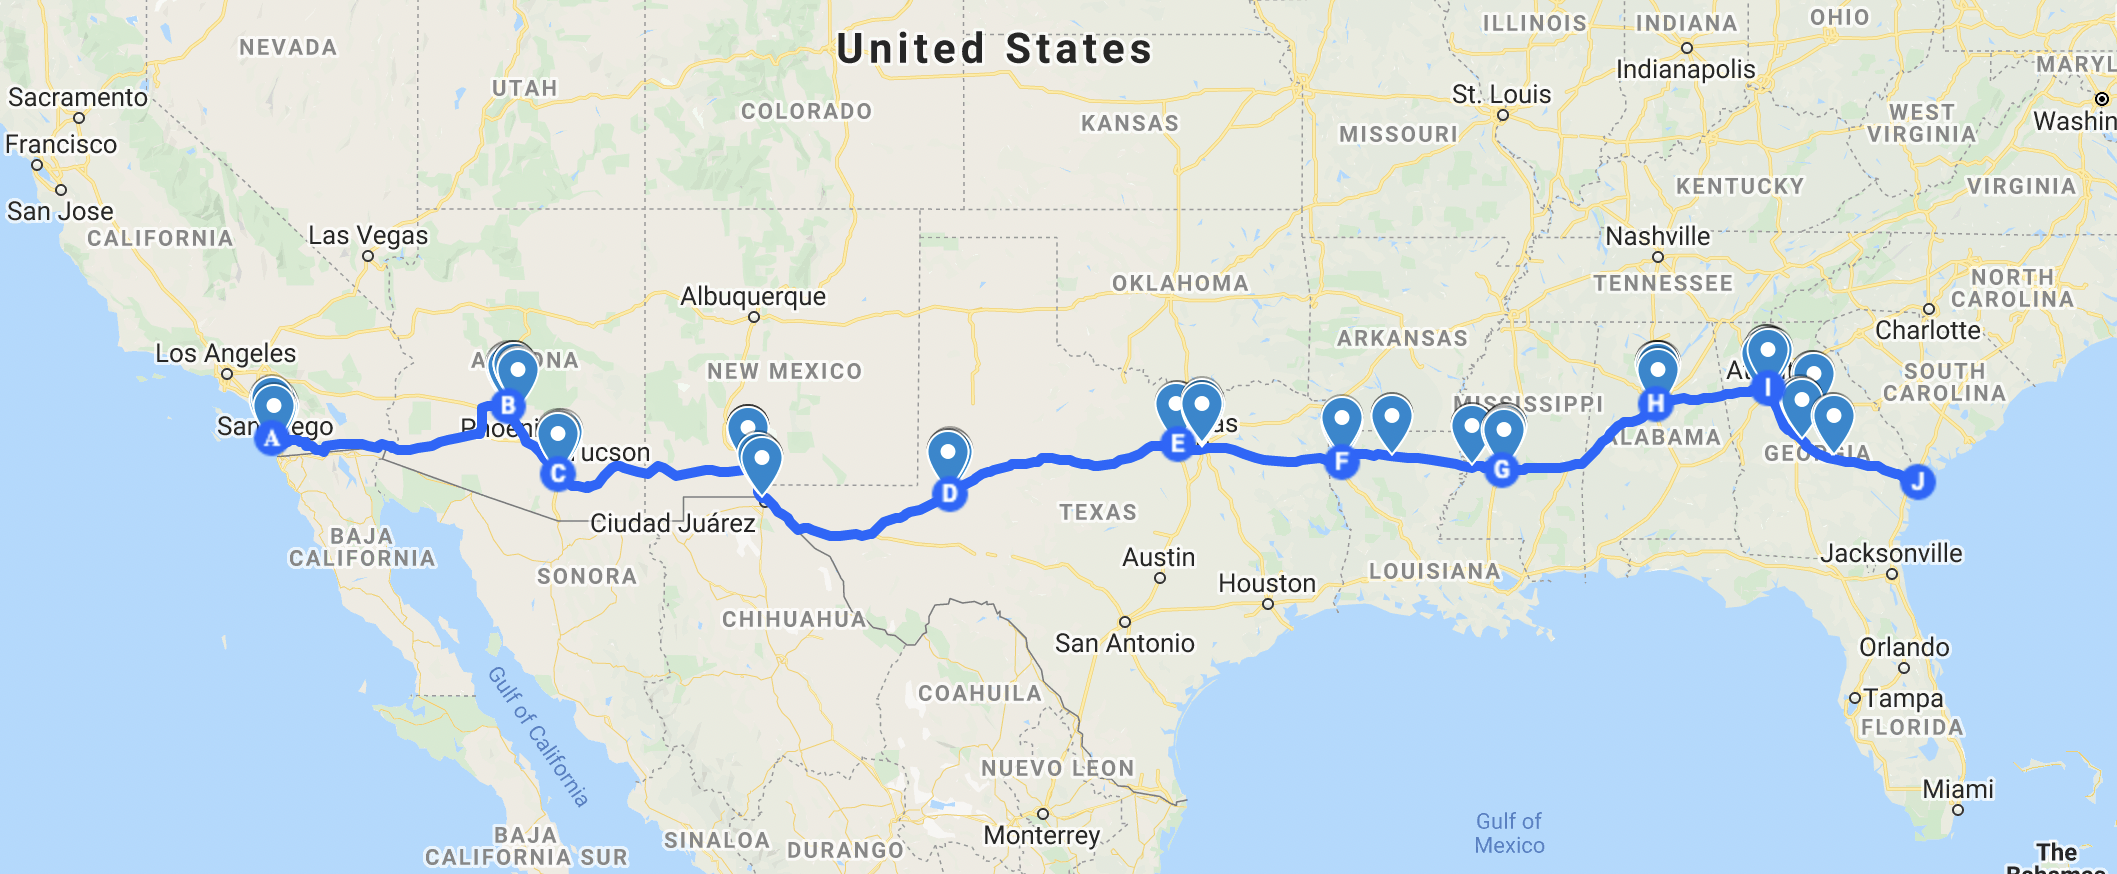 map of entire southern pacific bookish road trip route from San Diego to Savannah 